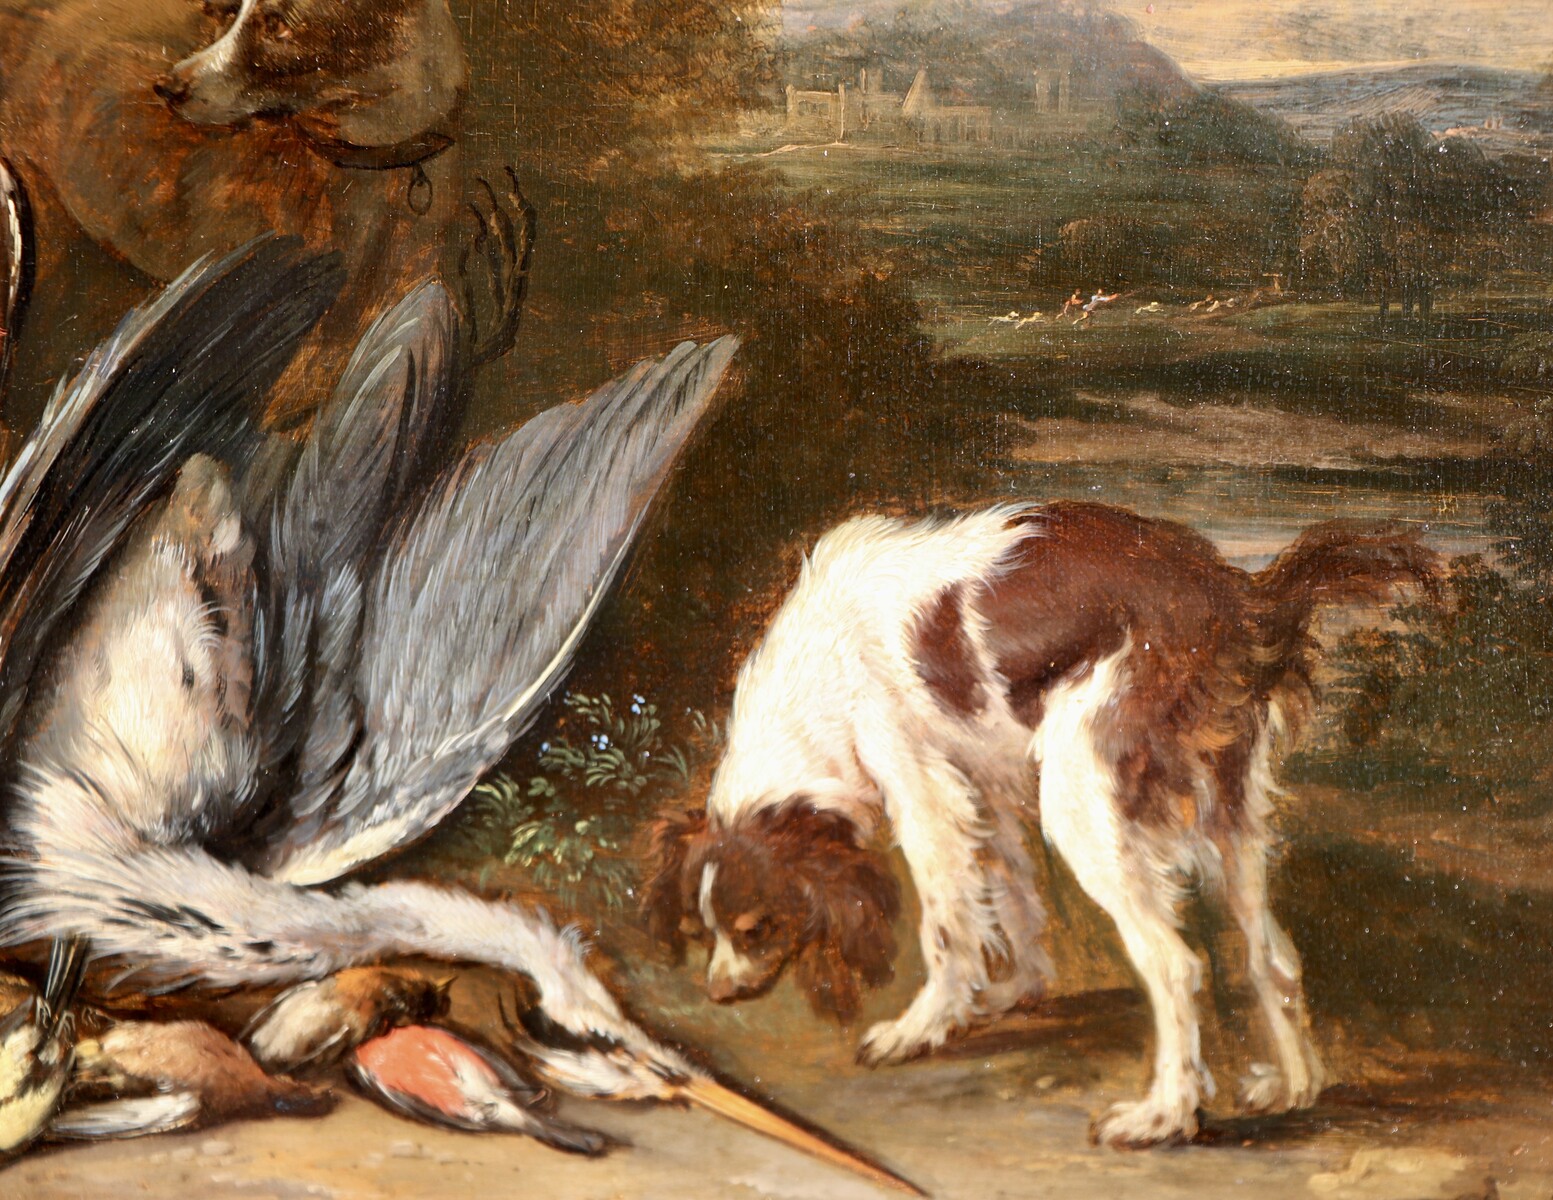 Two dogs guarding the spoils of hunt